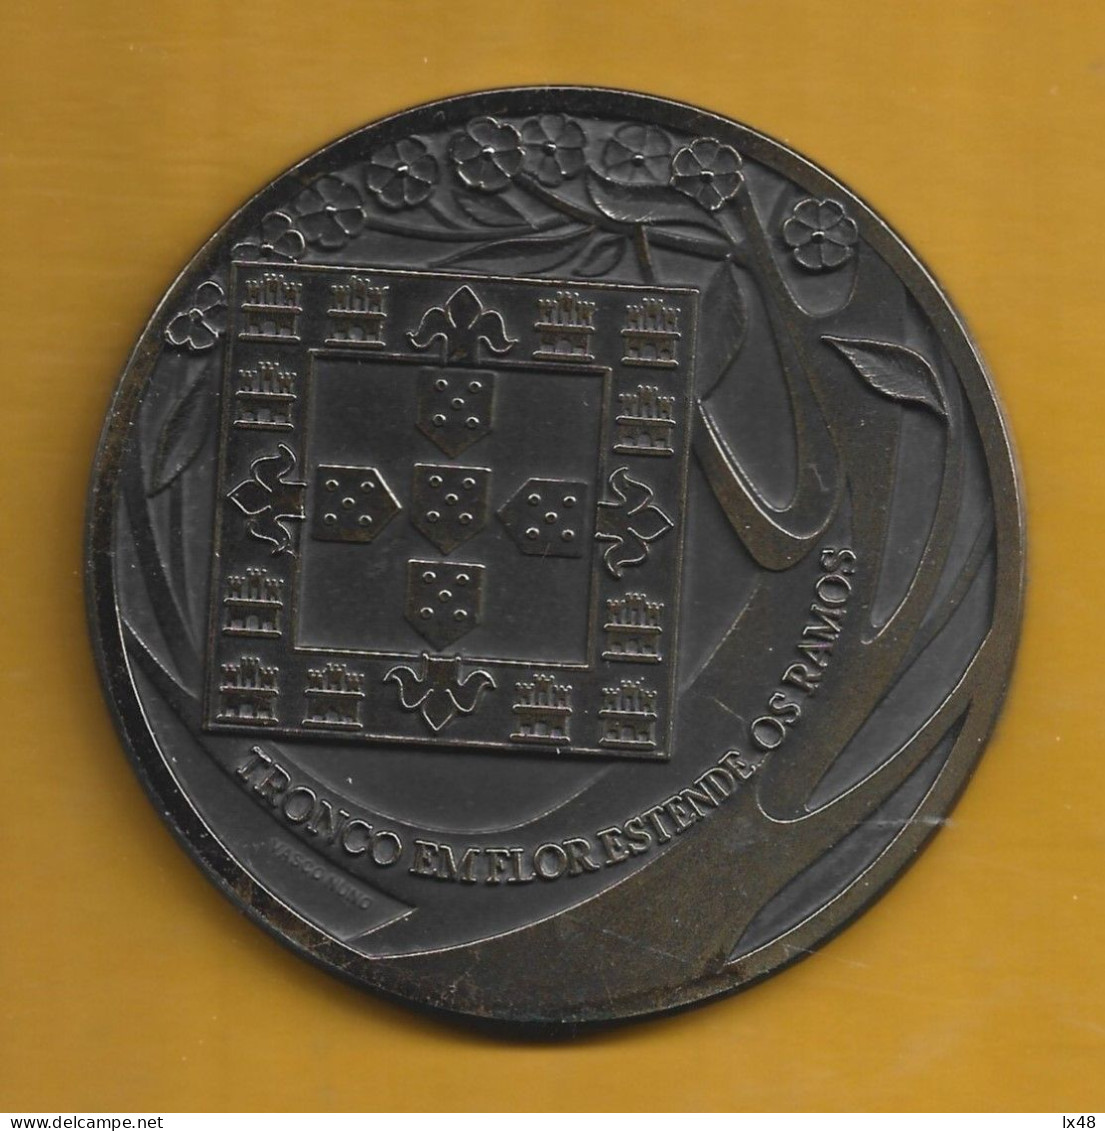 Mocidade Portuguesa. Portuguese Youth. Bronze Medal For 80th Years Of Portuguese Youth Foundation 1936/201. Portugiesisc - Firma's